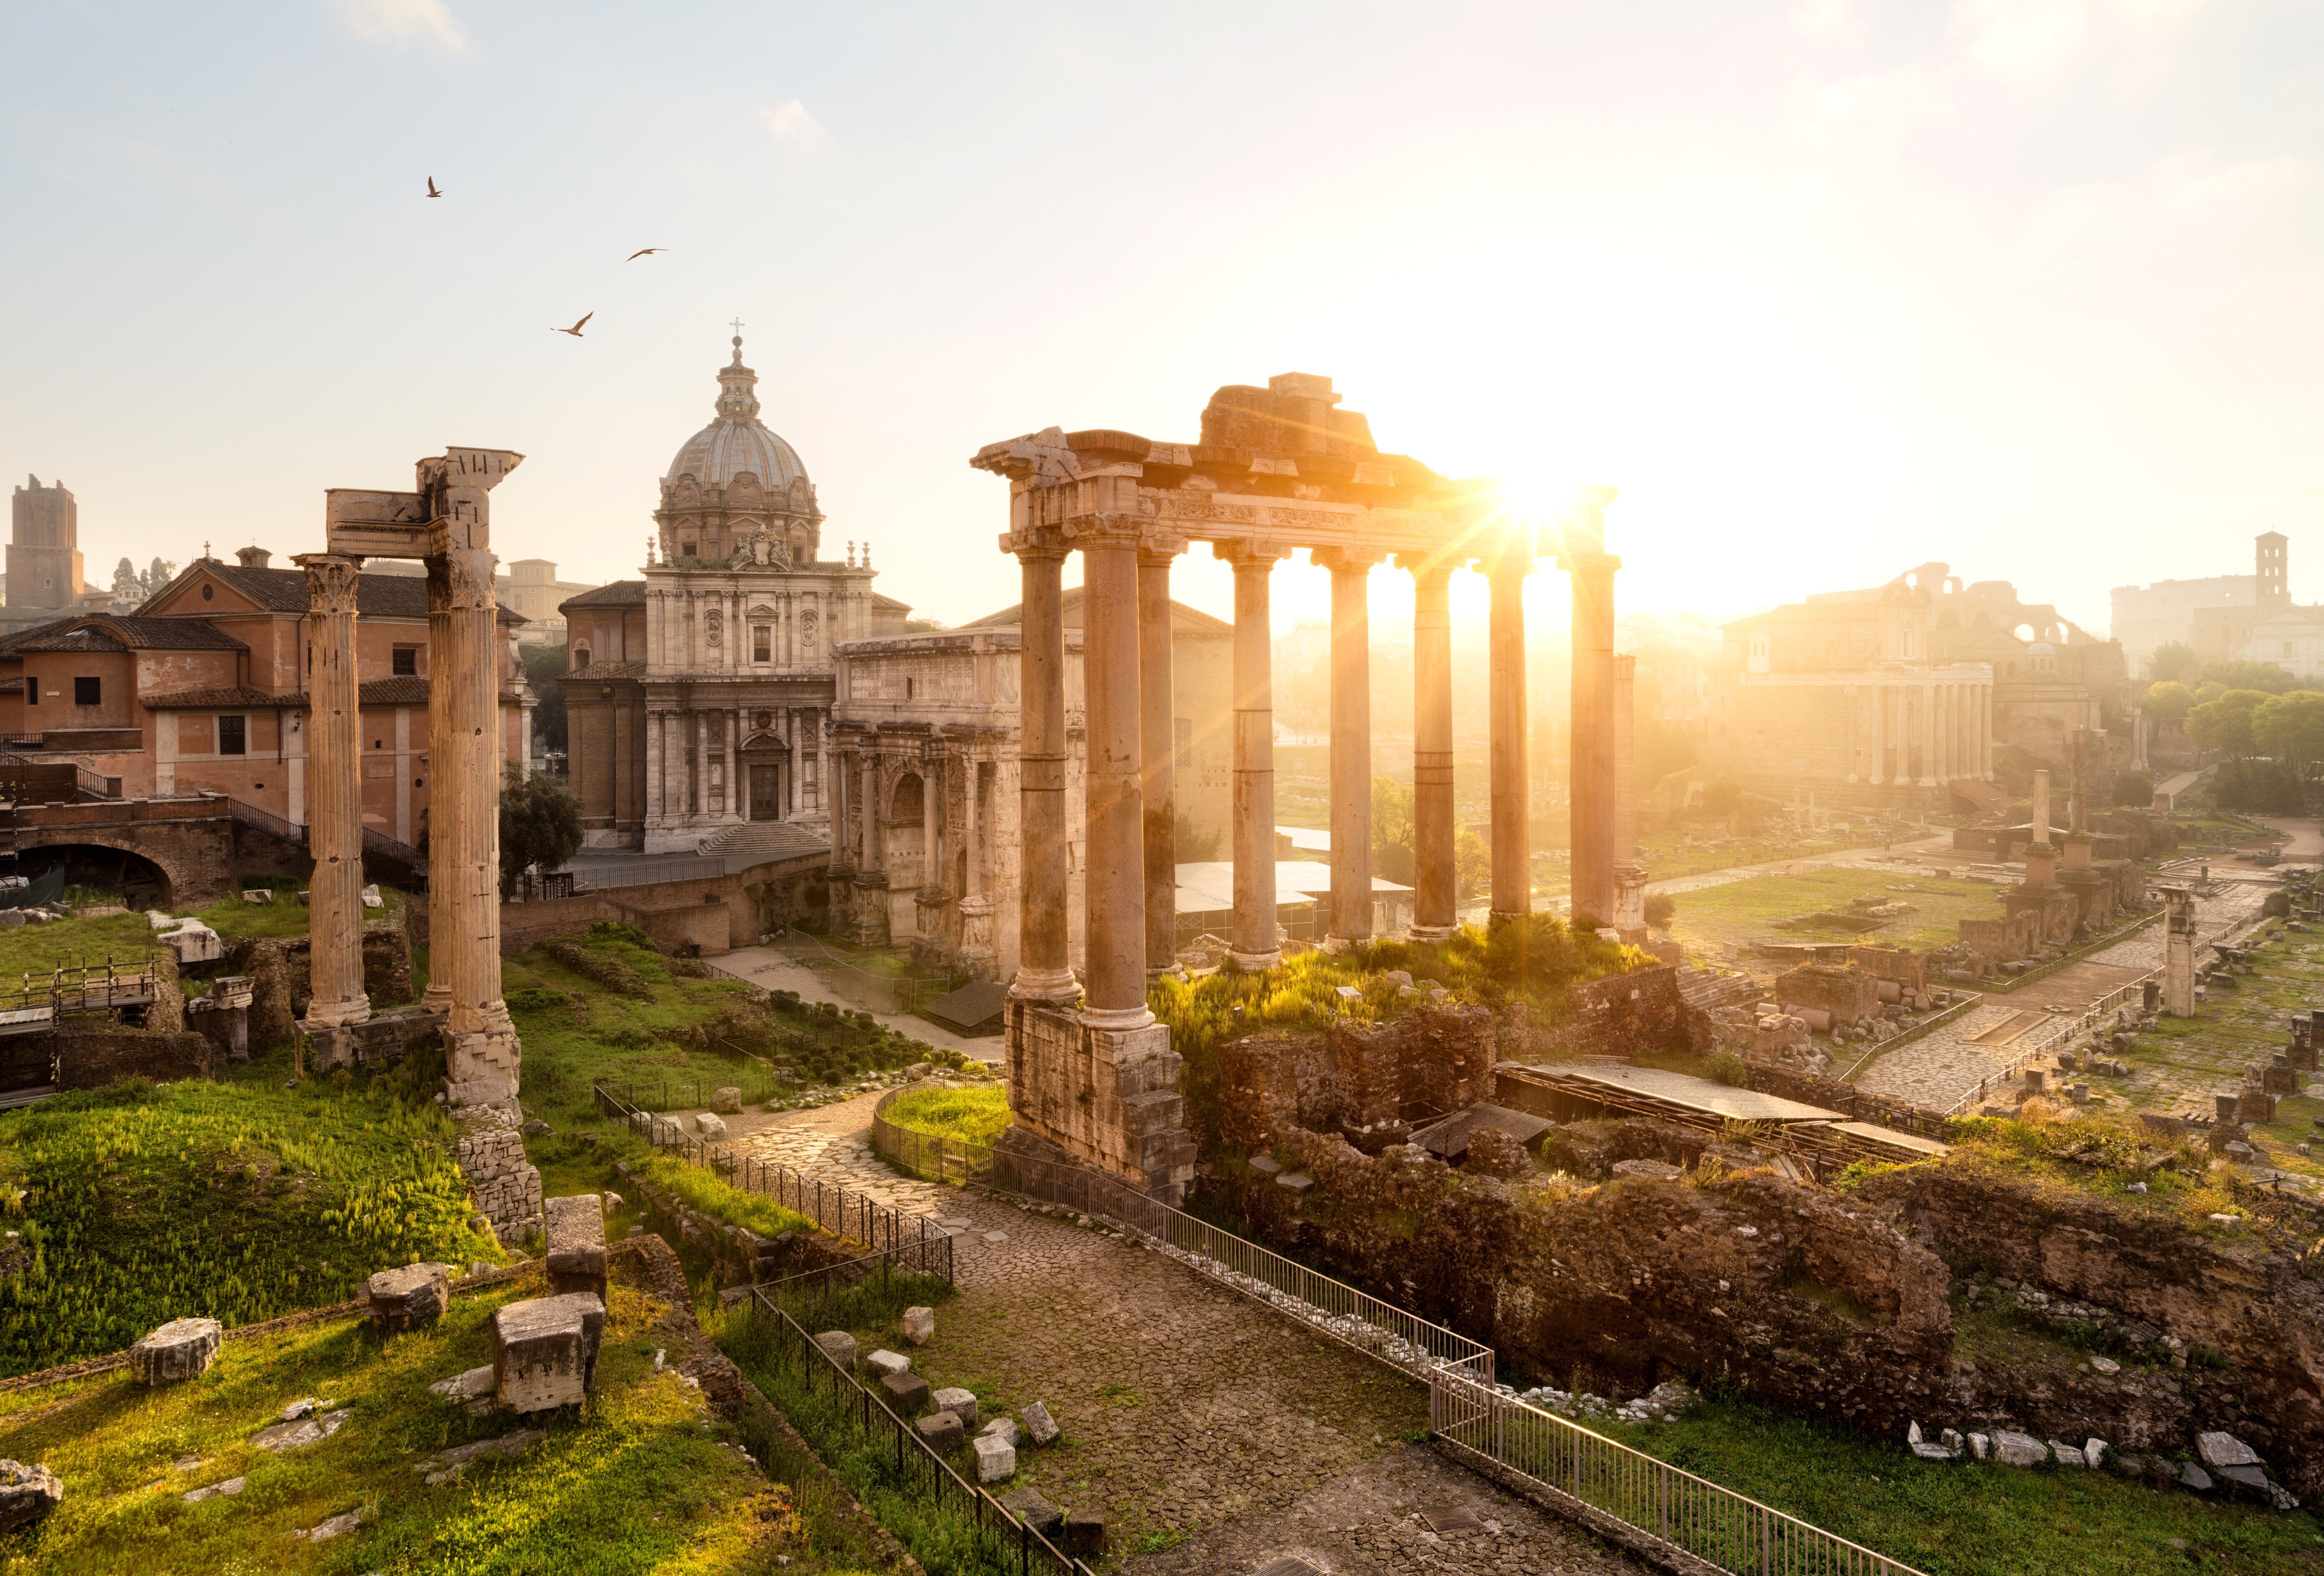 General 5760x3905 Italy Rome ruins Ancient Rome church temple ancient sunlight outdoors